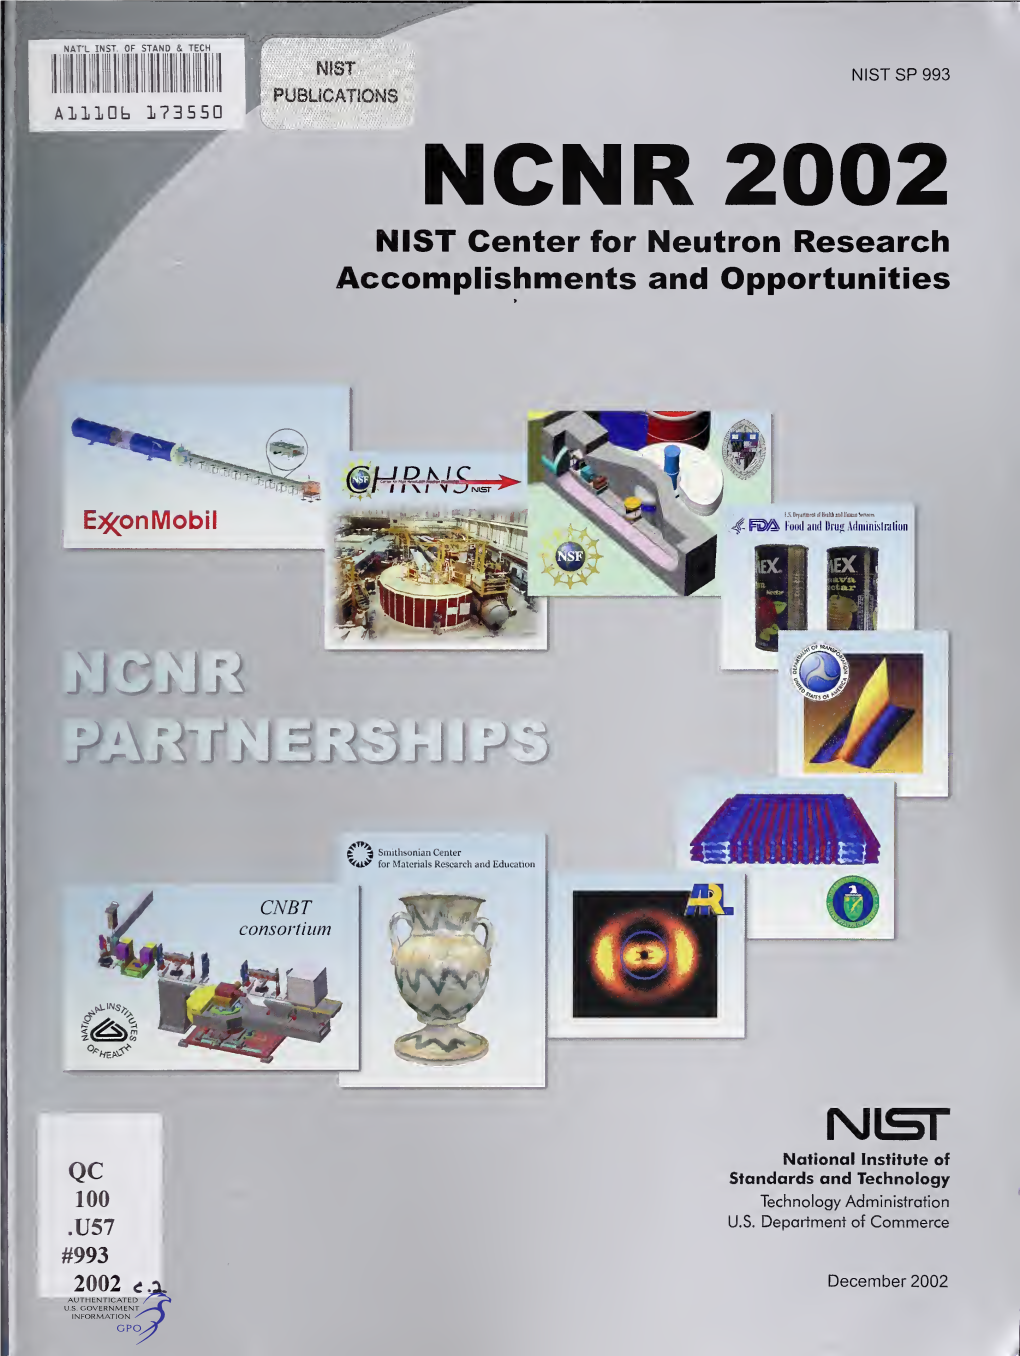 NCNR 2002 NIST Center for Neutron Research Accomplishments and Opportunities R